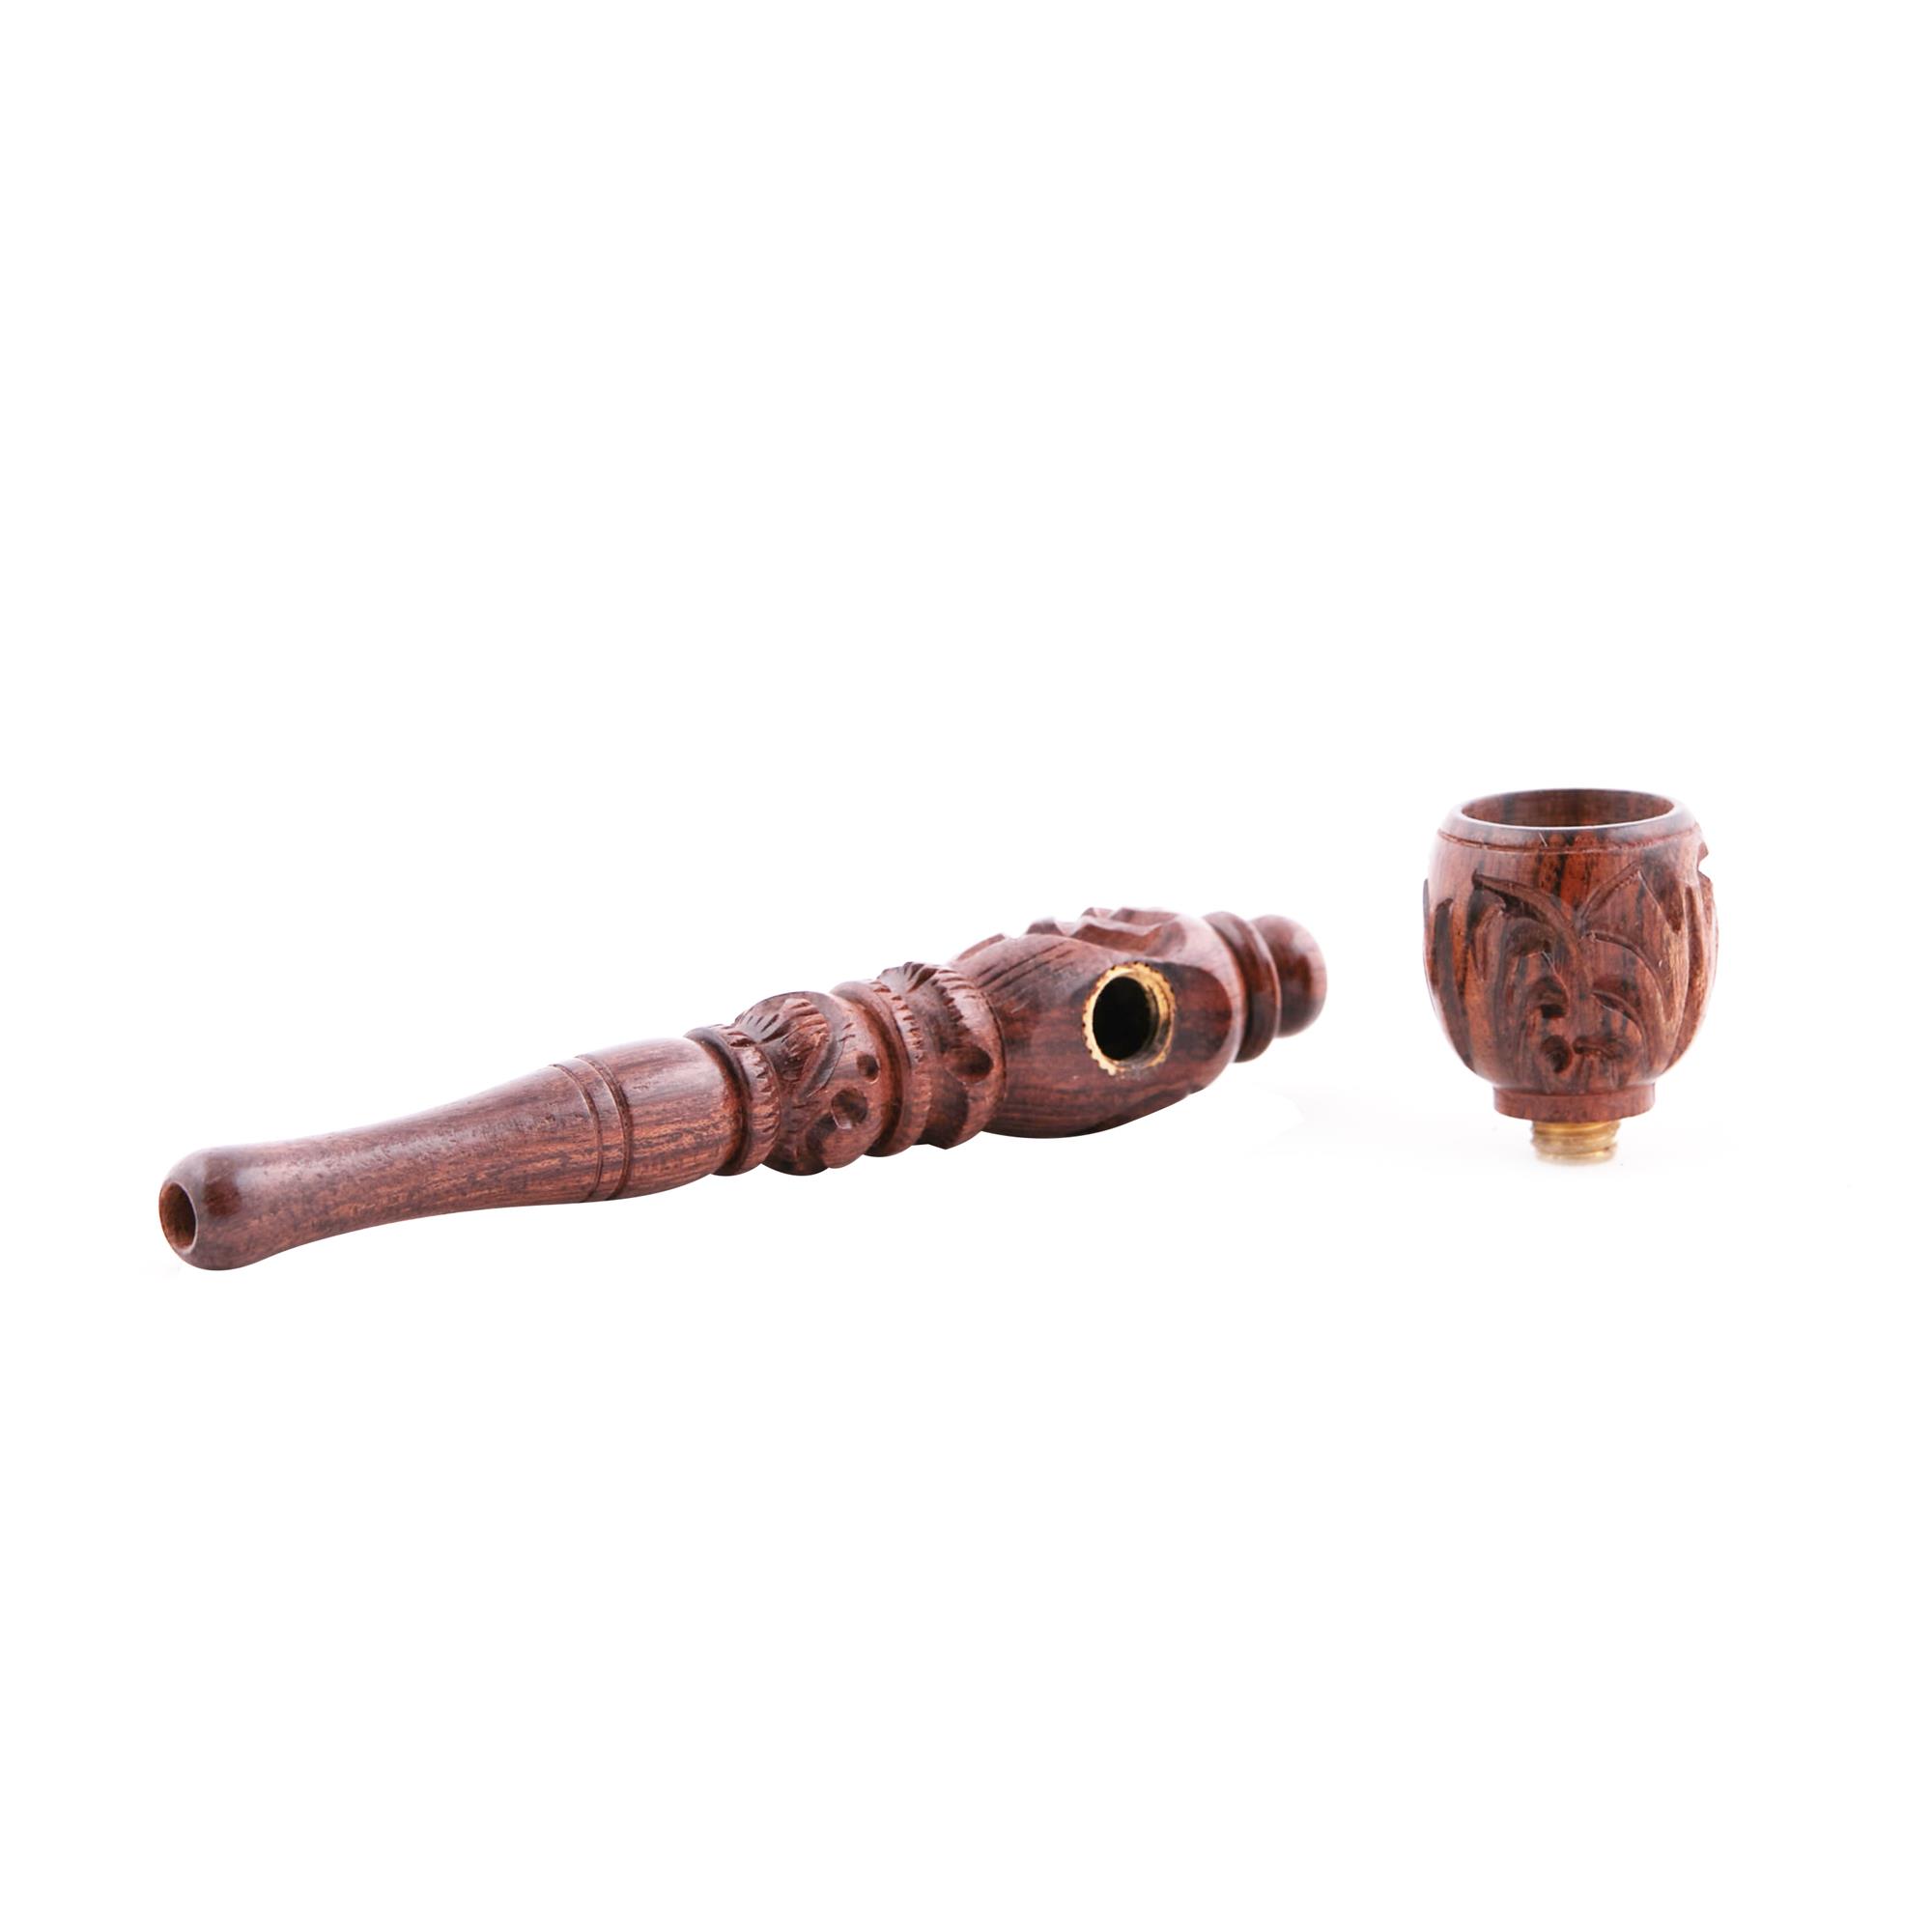 COMMON ASH WOOD PIPE